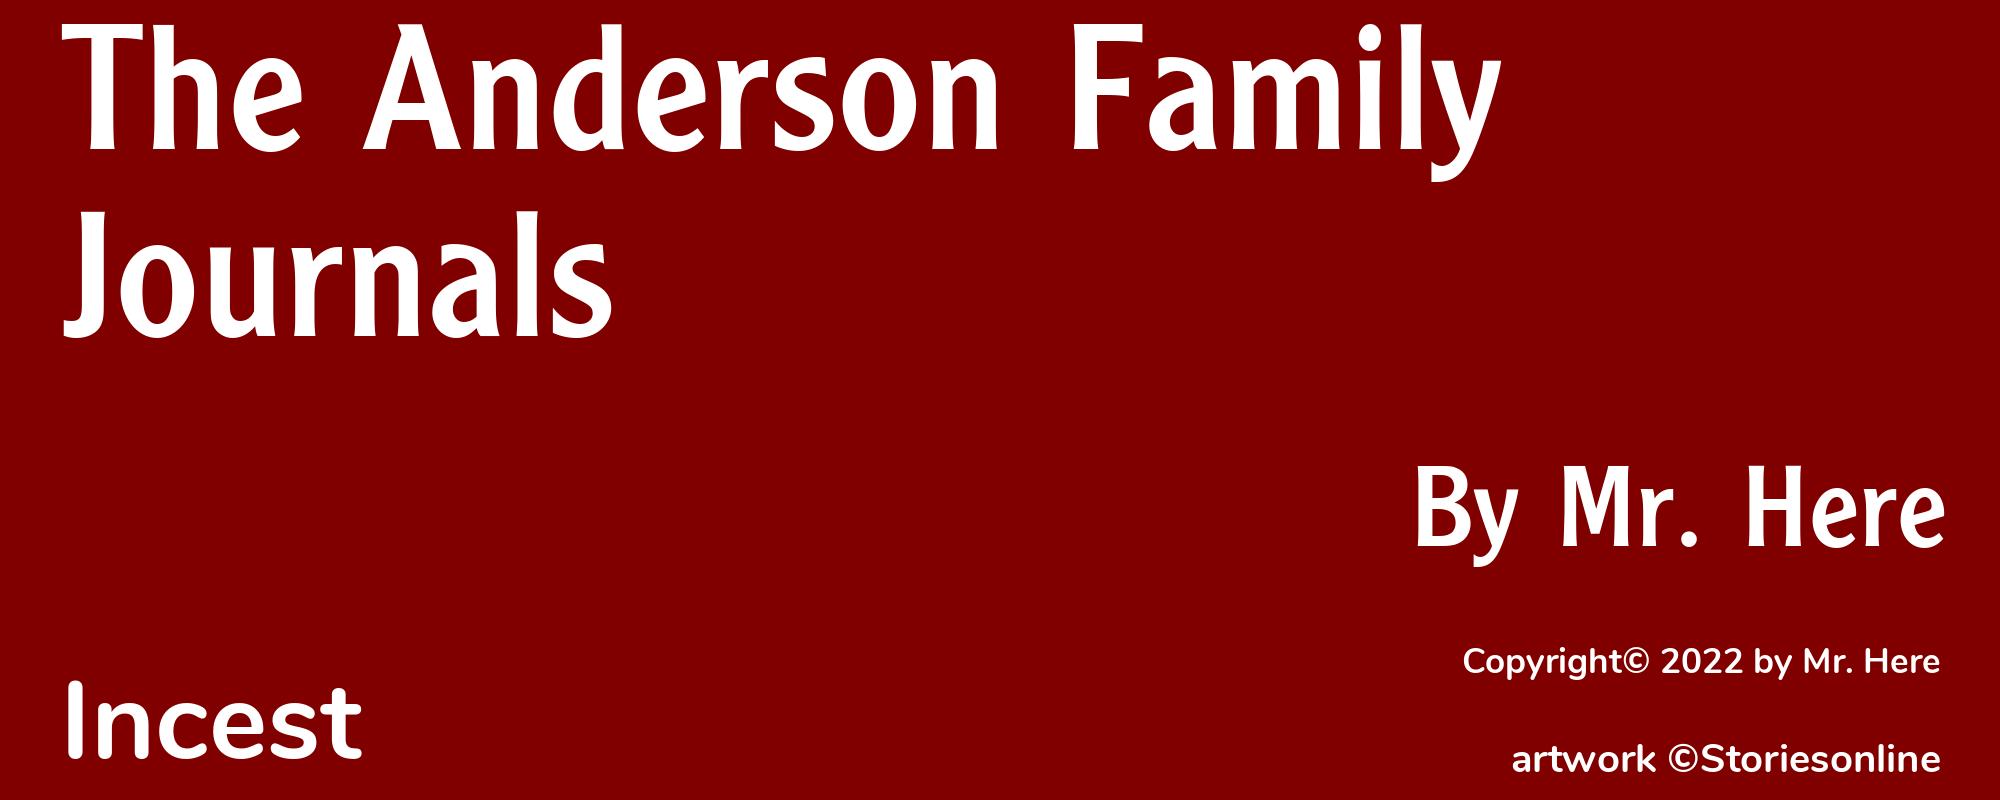 The Anderson Family Journals - Cover